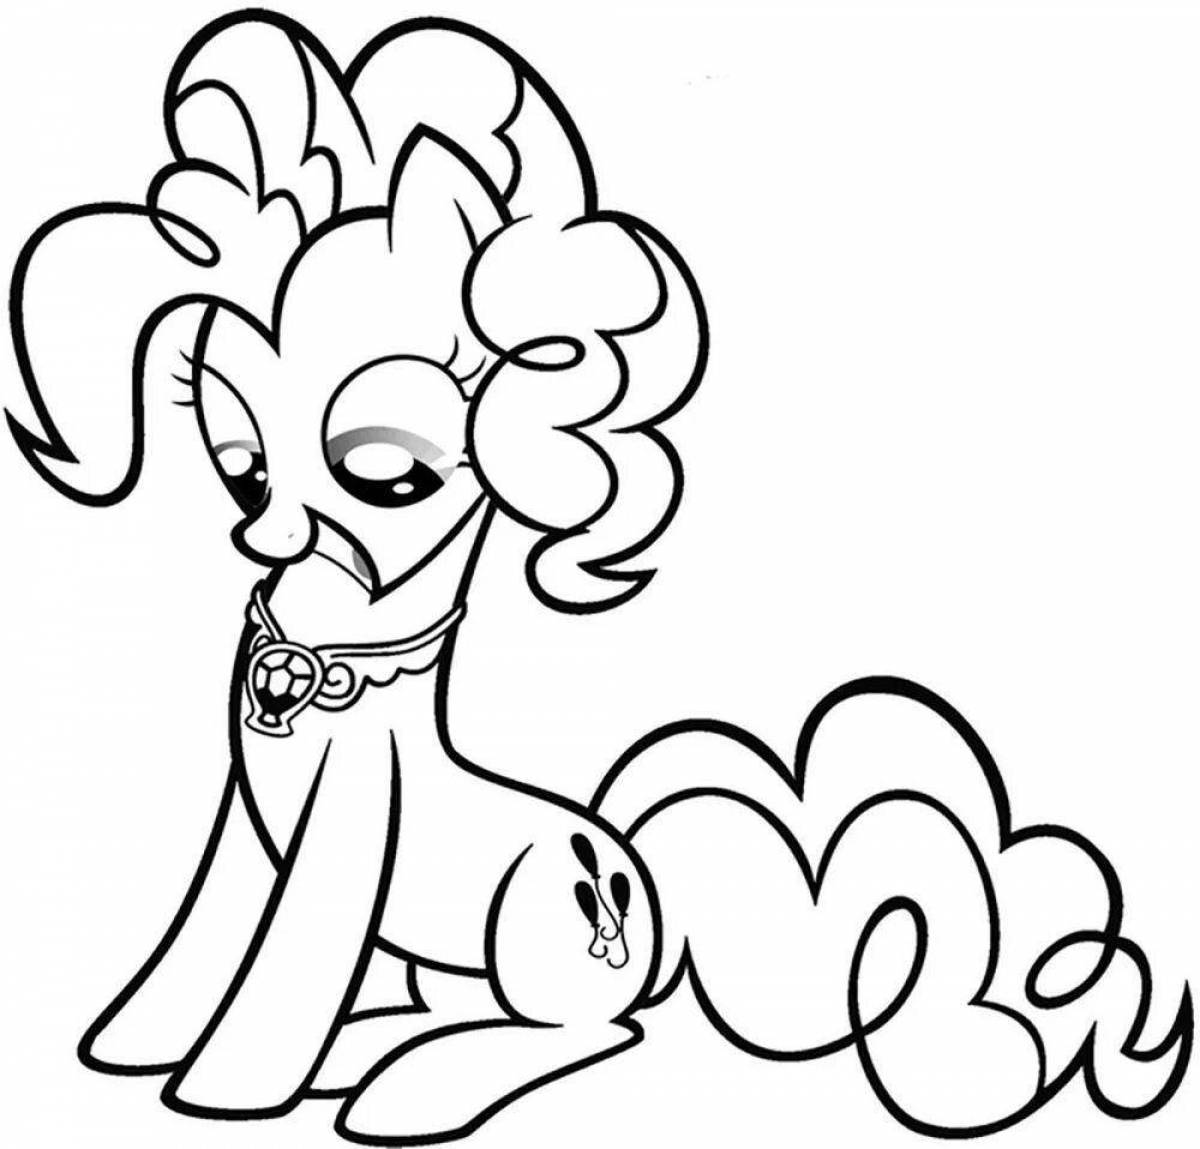 Pinky pie's adorable coloring page